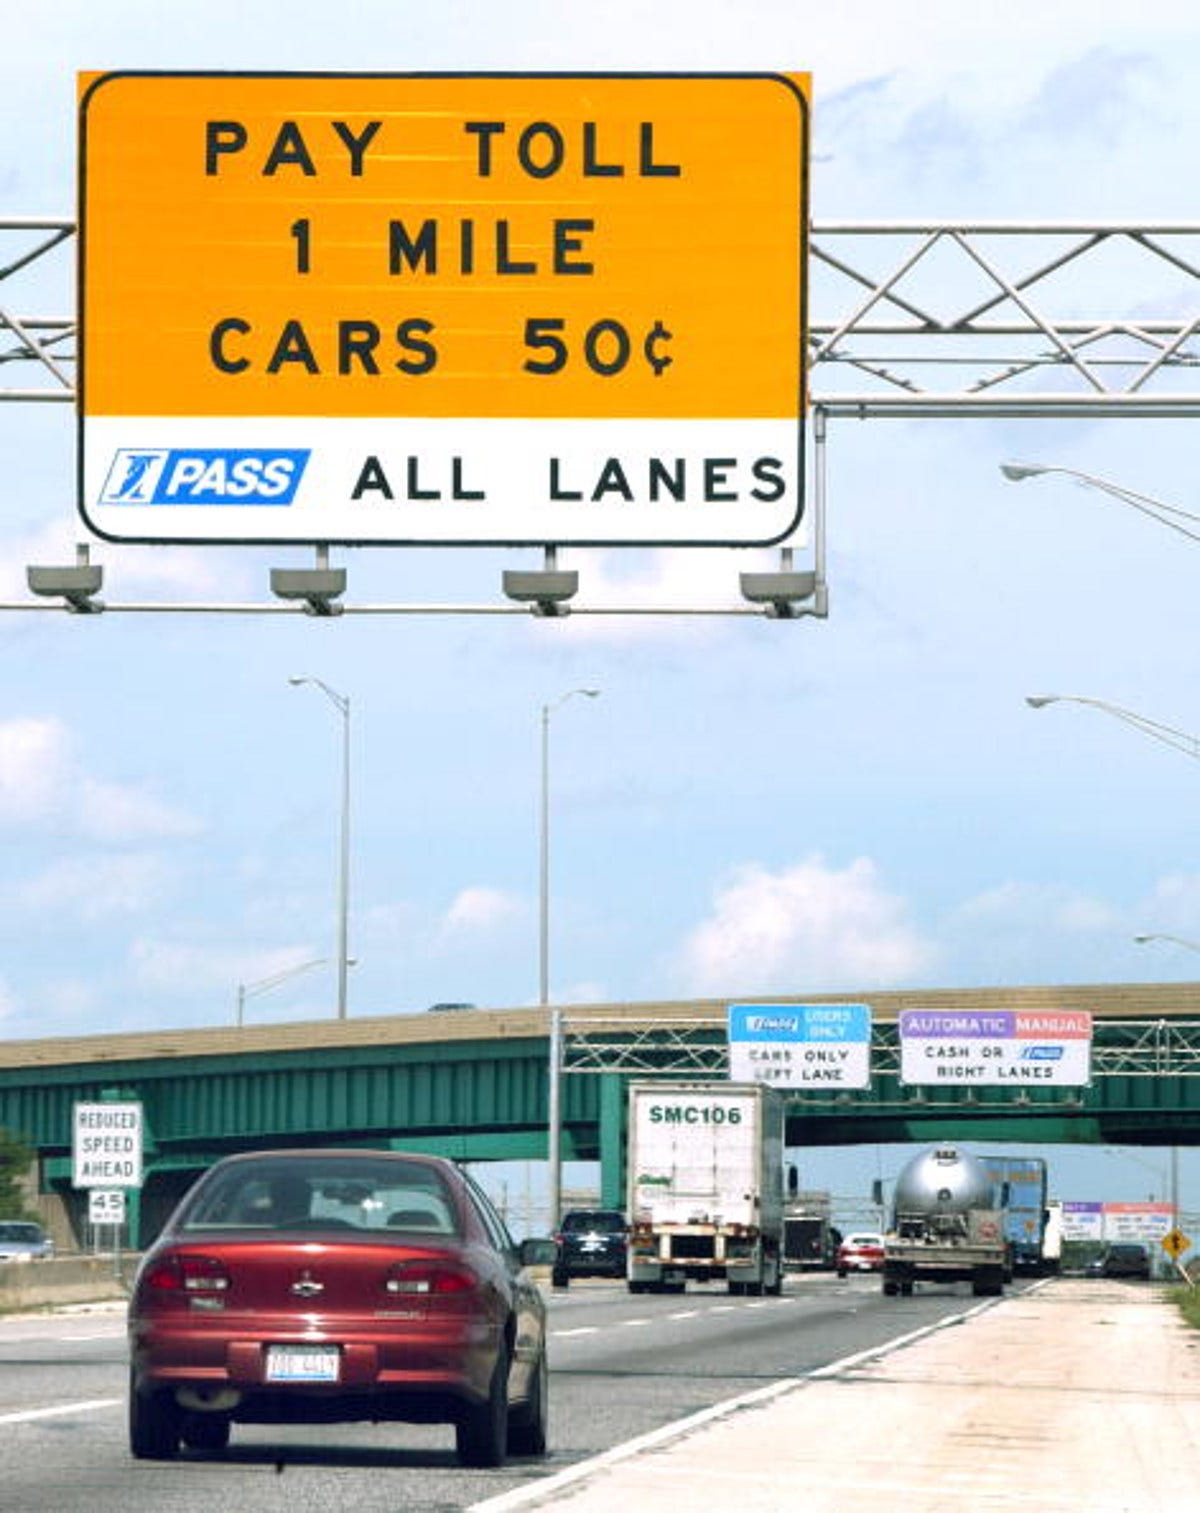 This App Allows You To Pay For Tolls In Illinois Without I-PASS